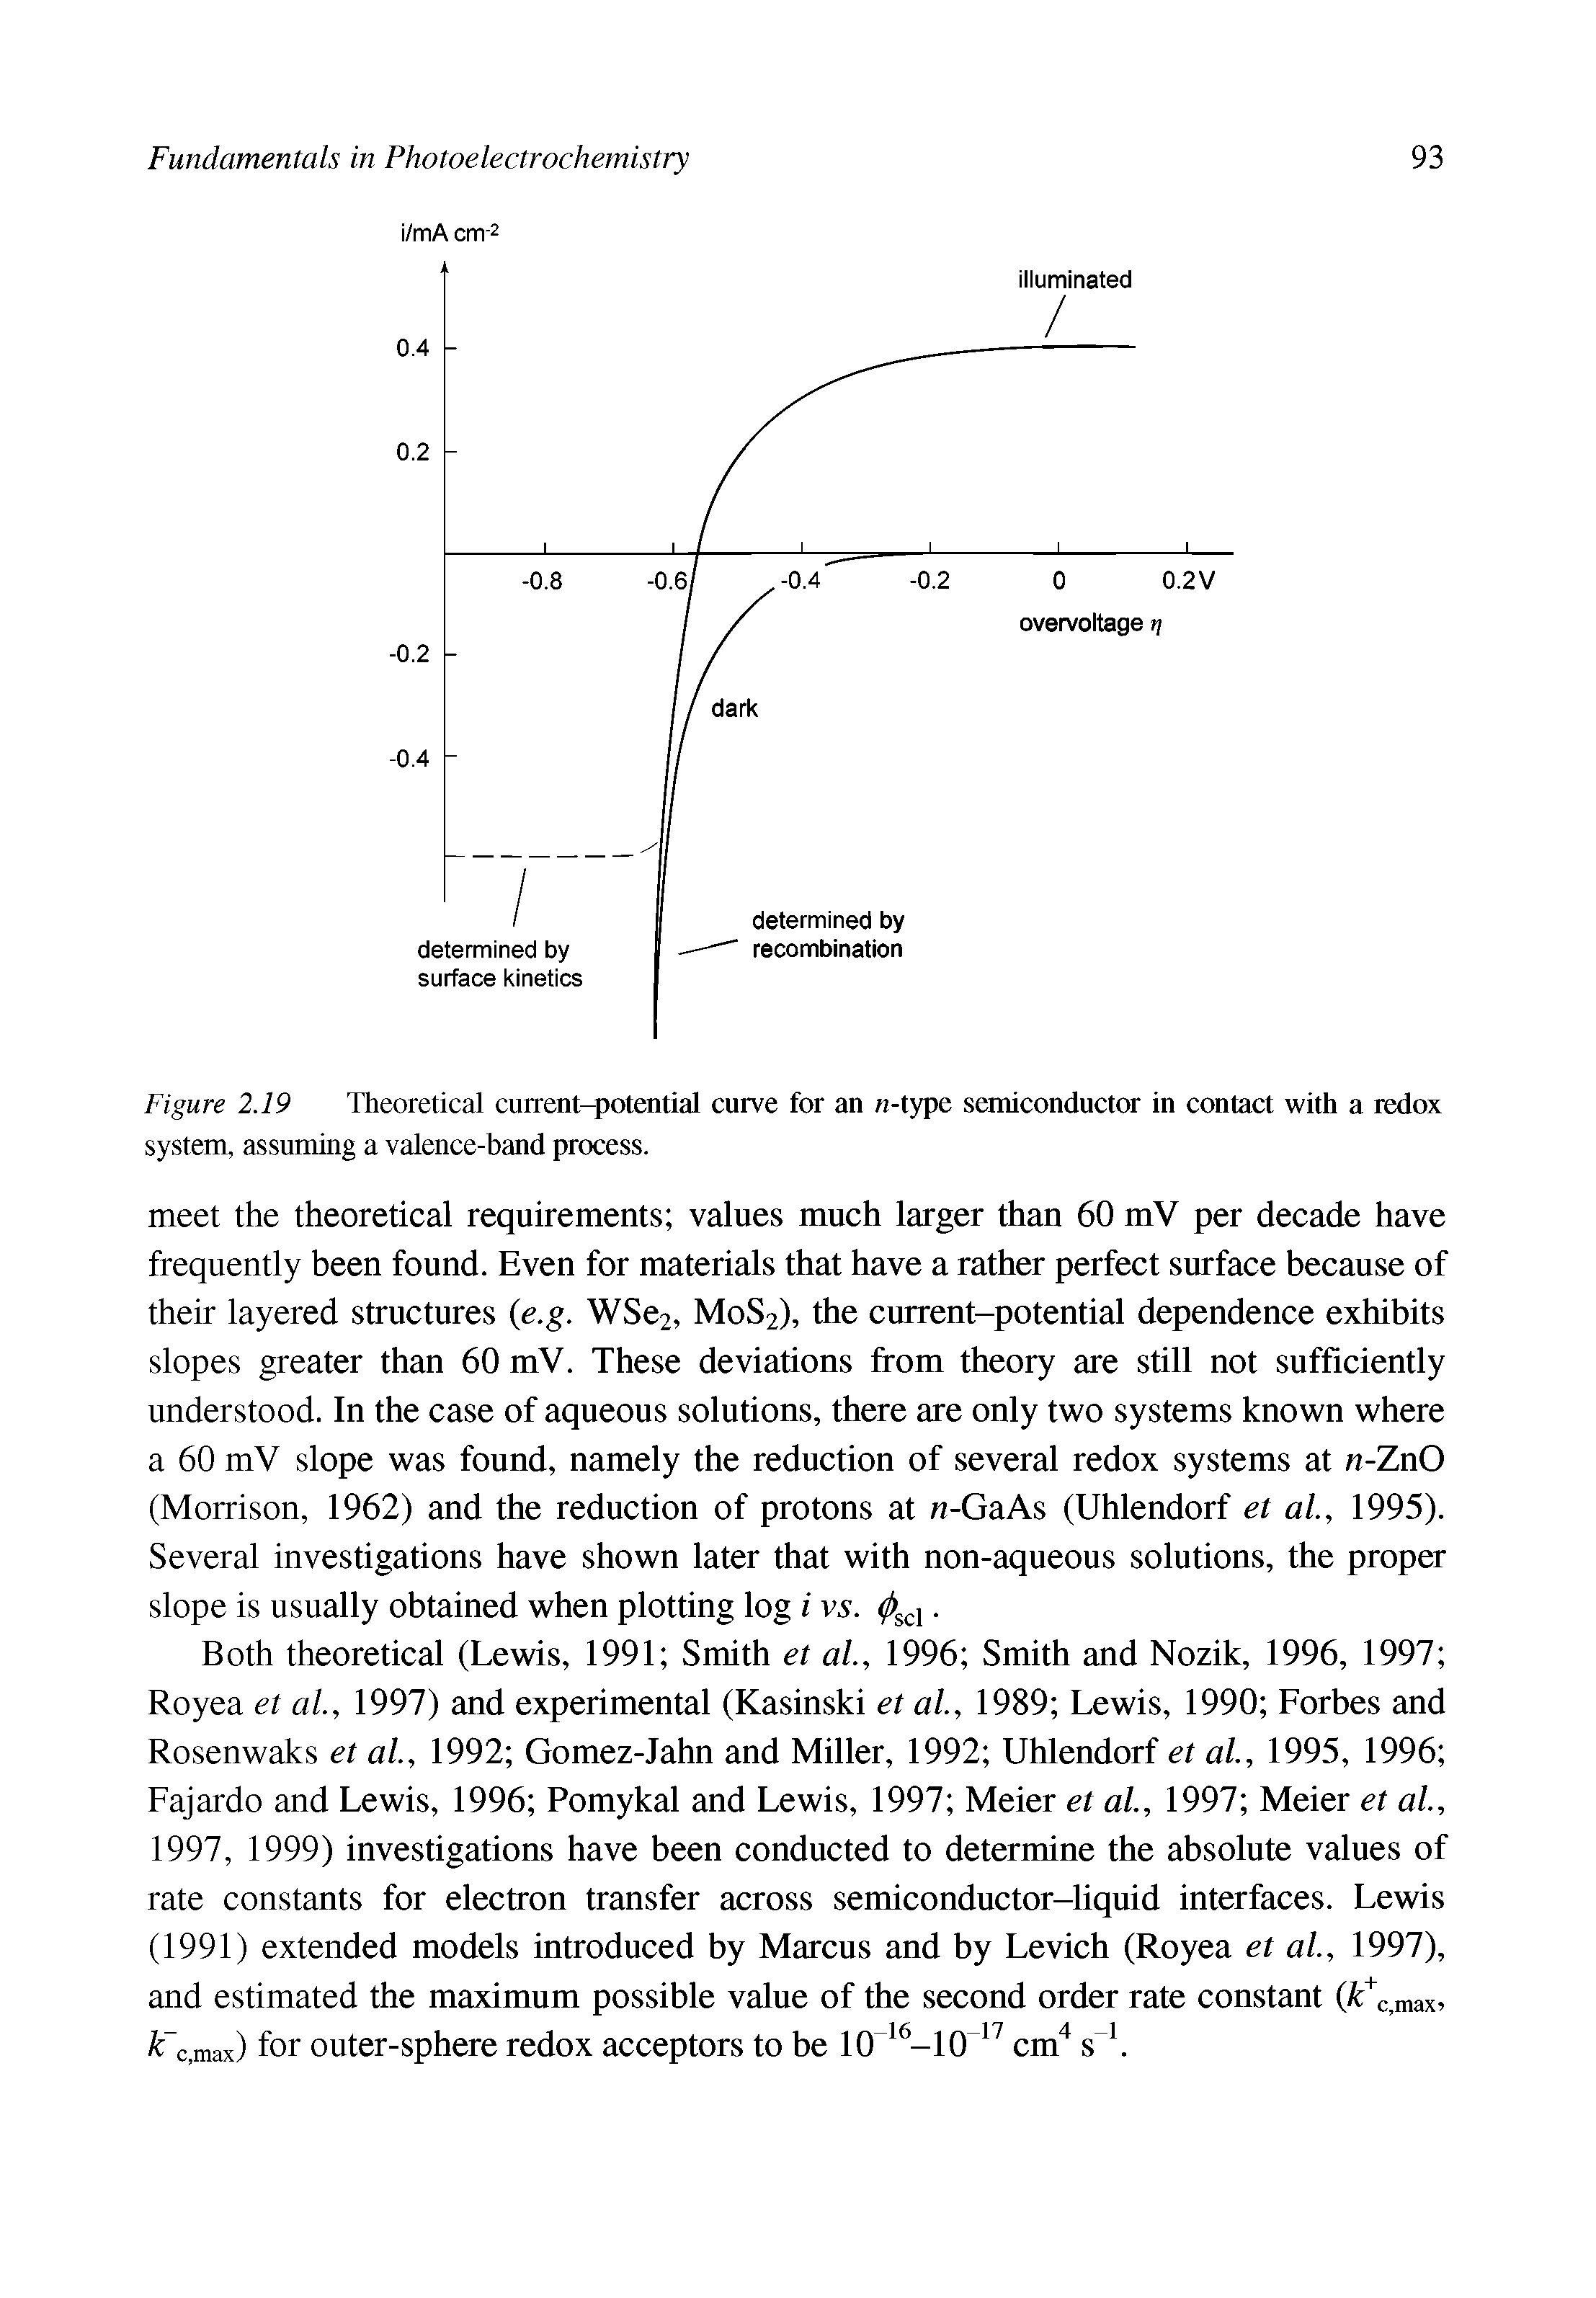 Figure 2.19 Theoretical current-potential curve for an n-type semiconductor in contact with a redox system, assuming a valence-band process.